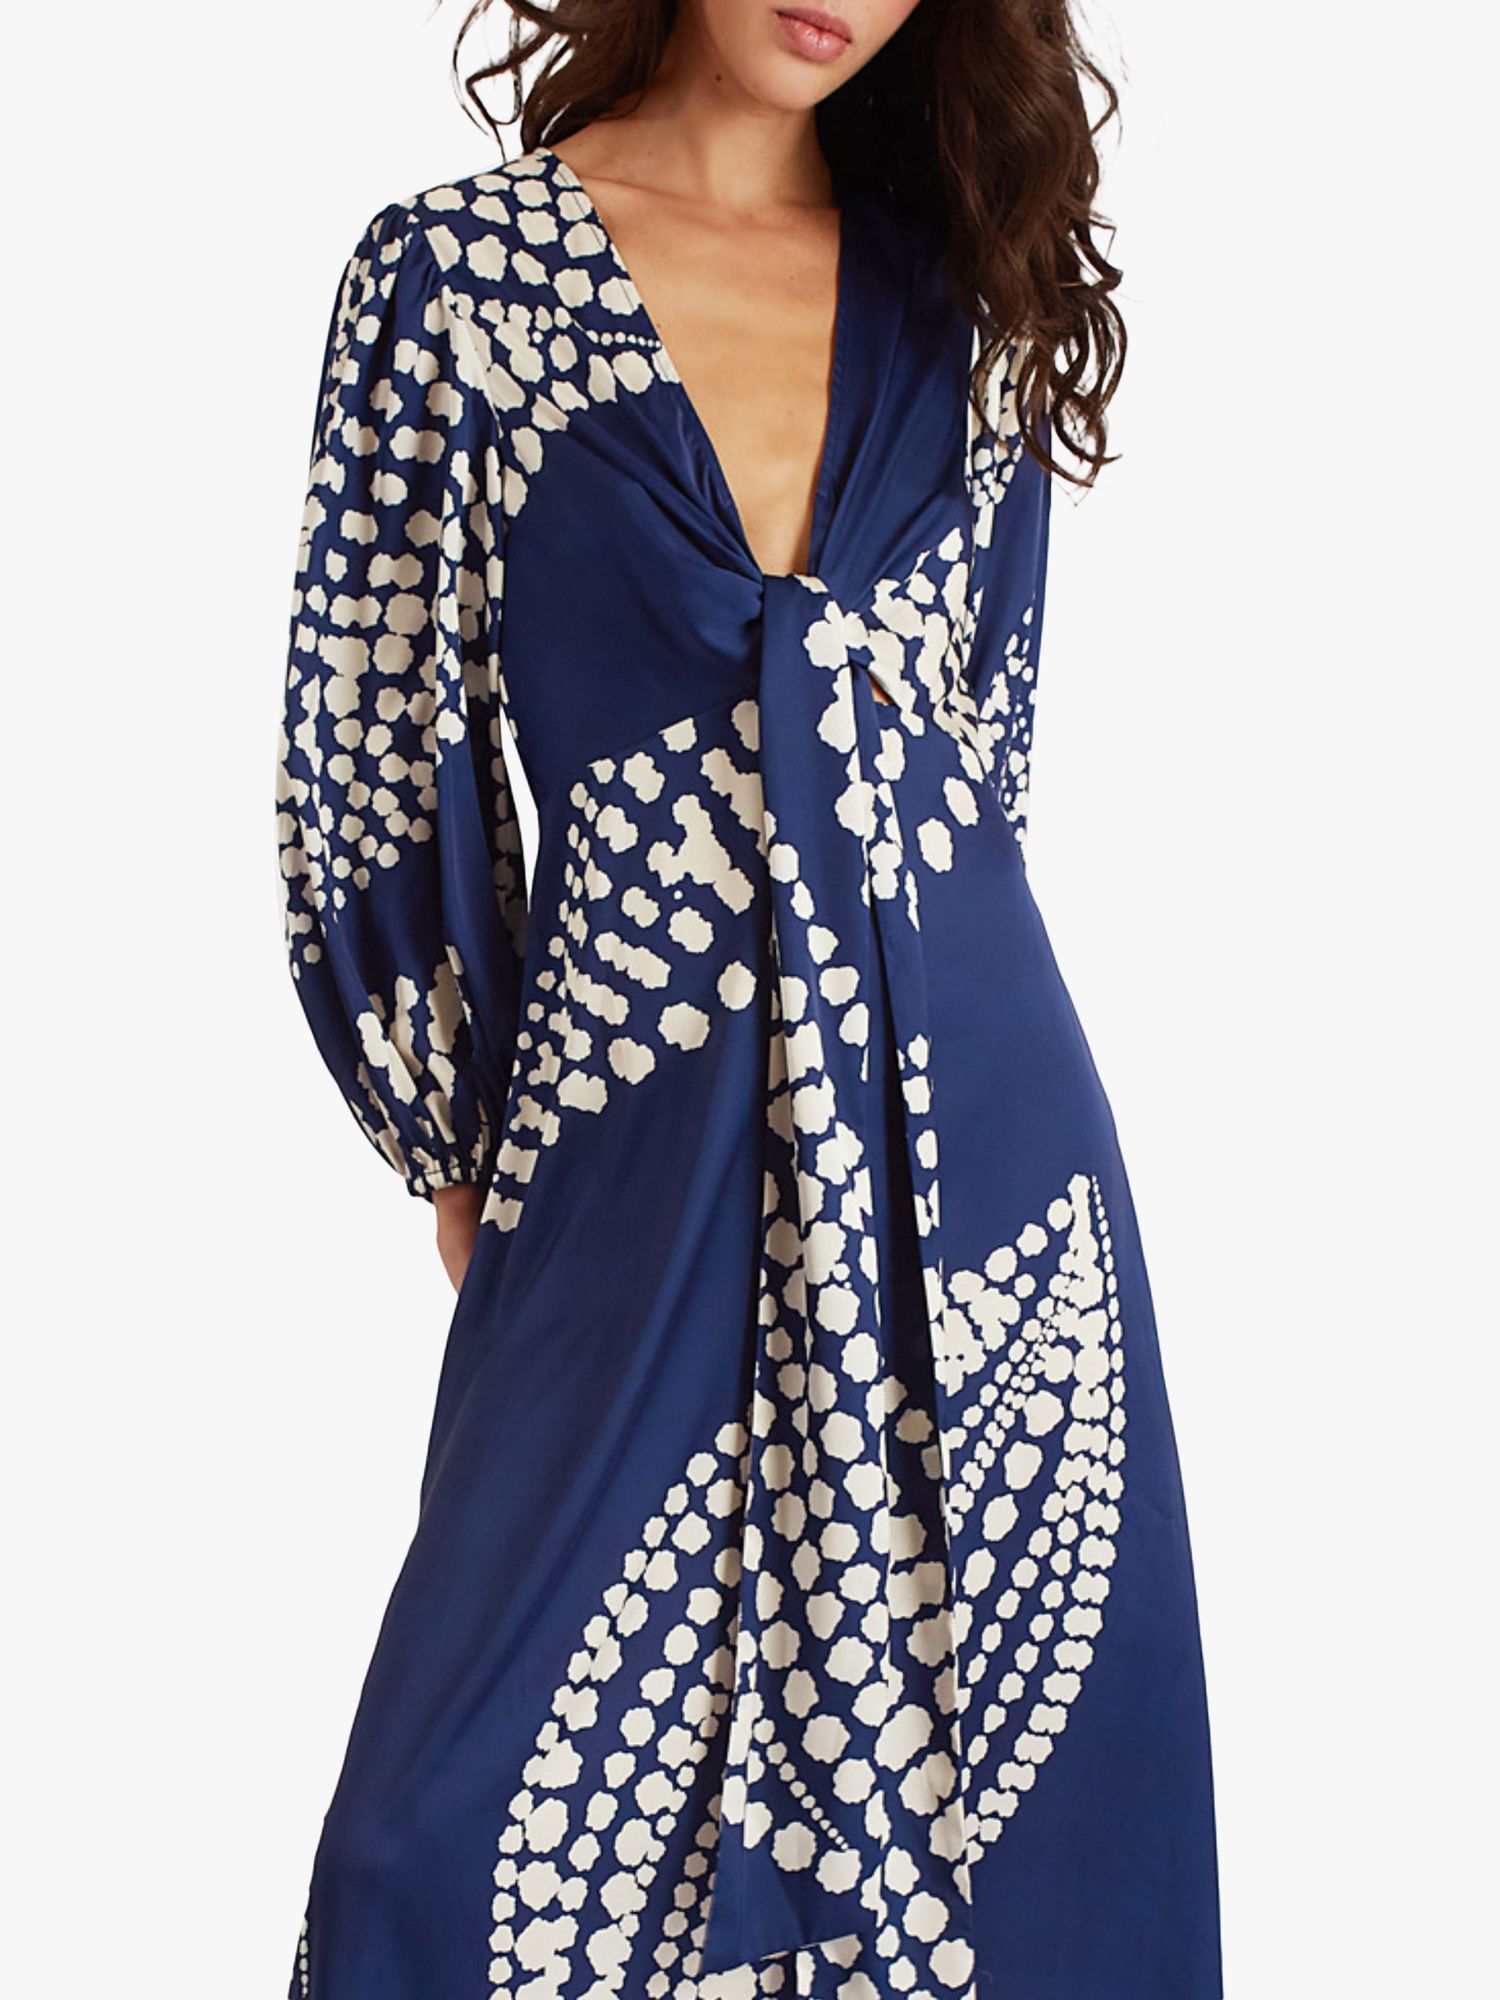 Traffic People The Odes Betsy Silk Blend Dress, Blue, XS